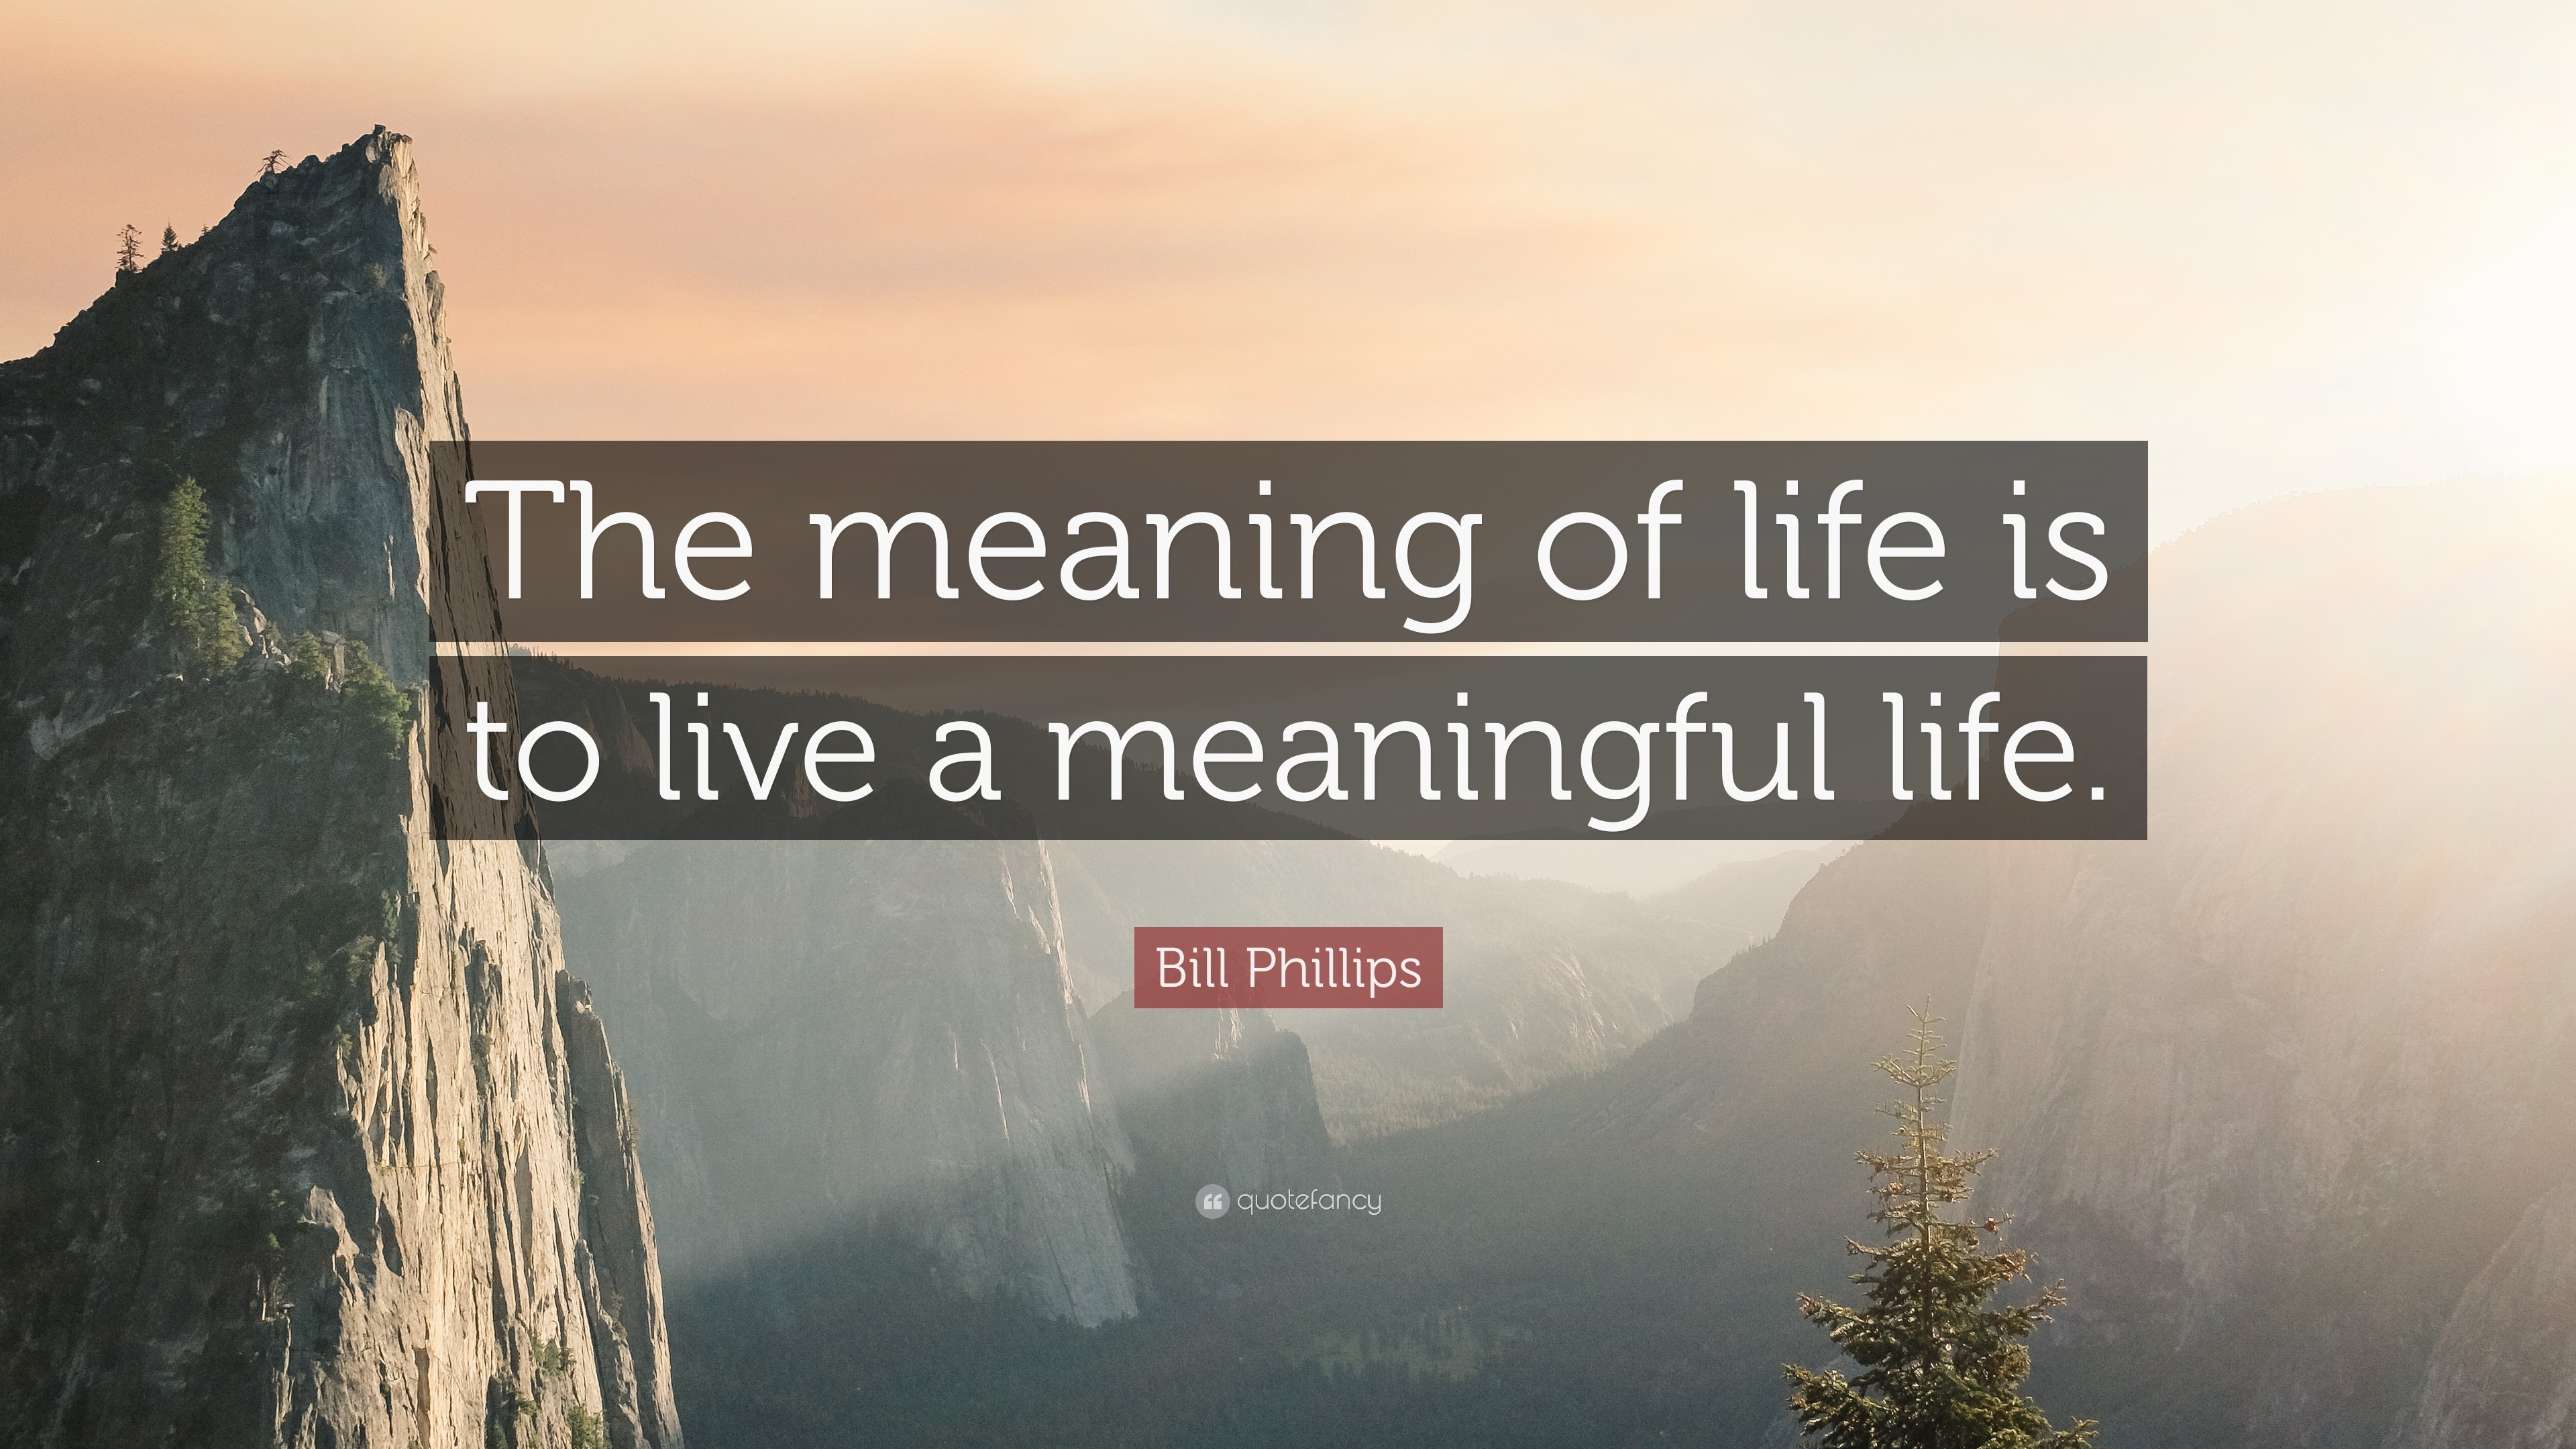 3840x2160 Bill Phillips Quote: “The meaning of life is to live a meaningful life.